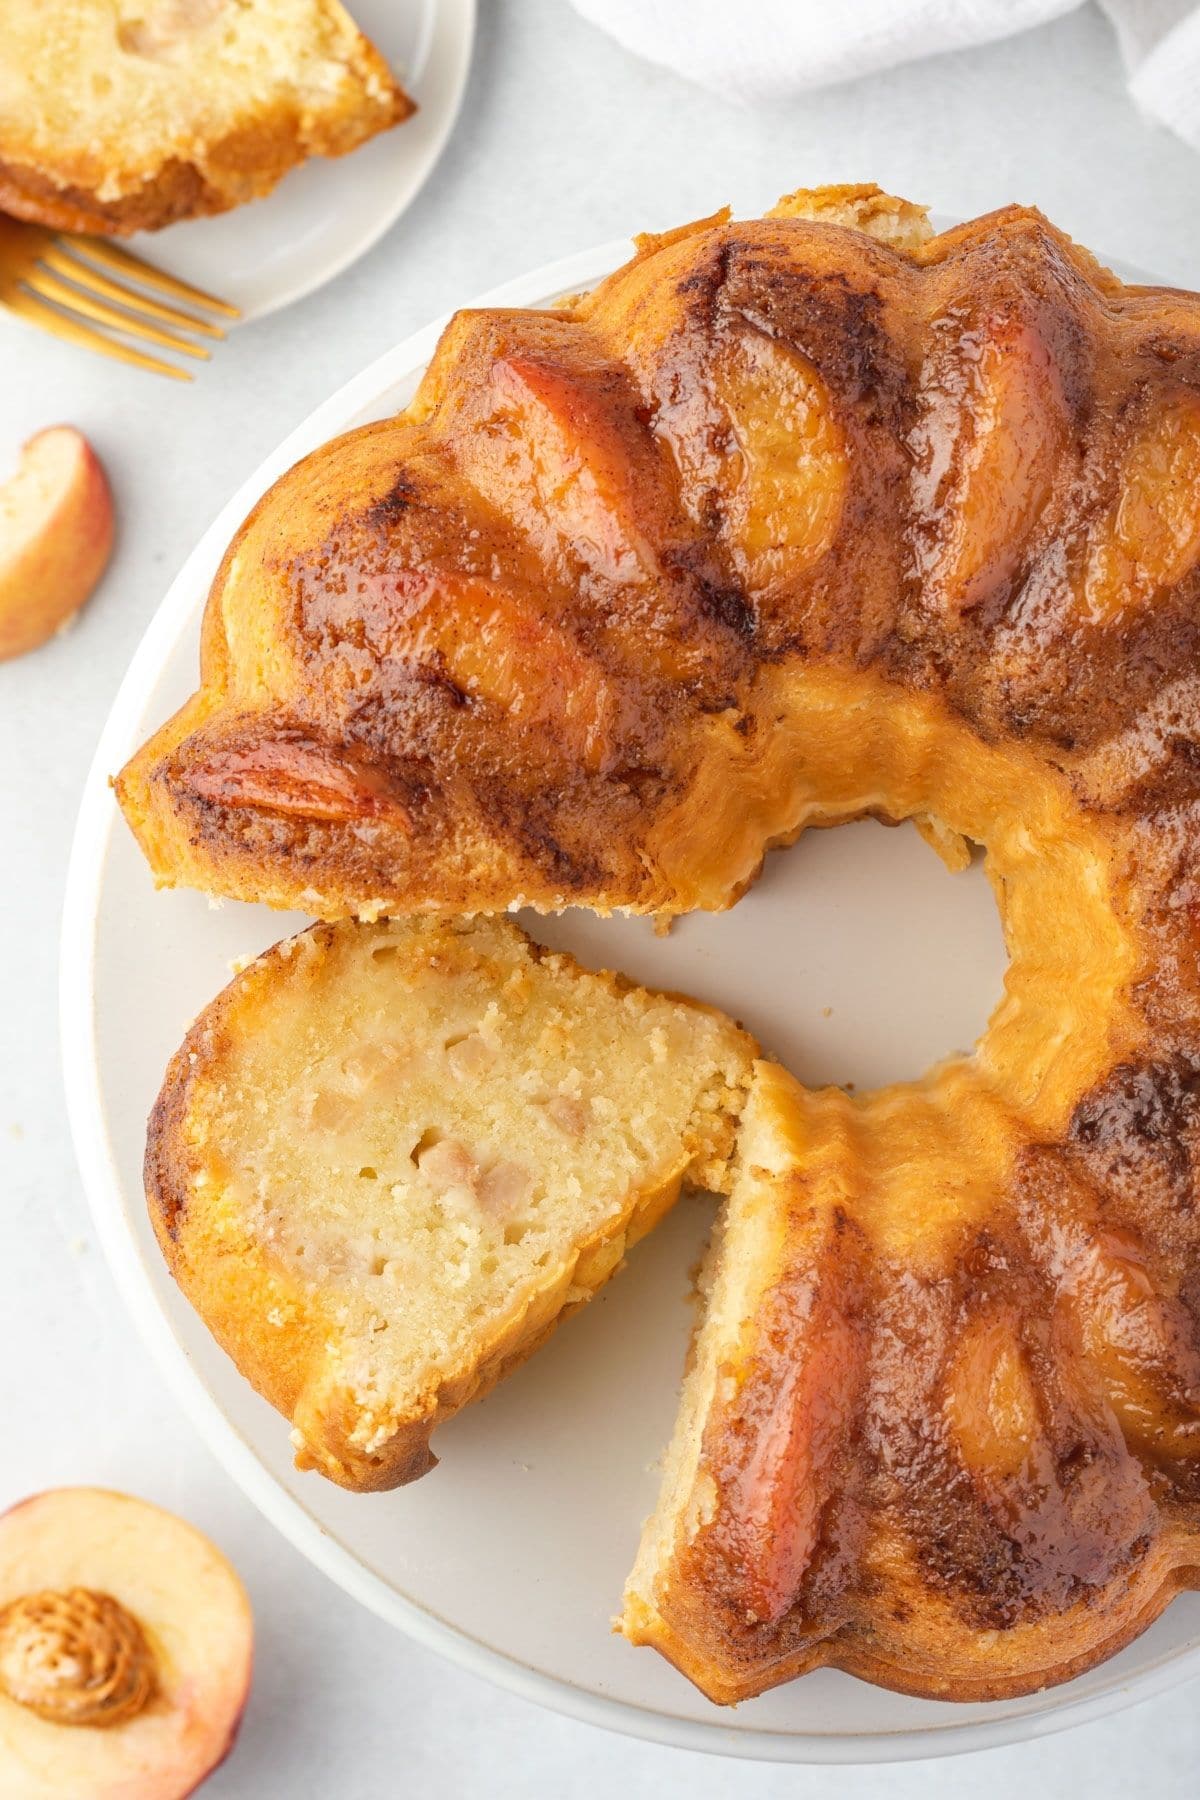 Peach bundt cake with a slice cut and laying on cake plate.